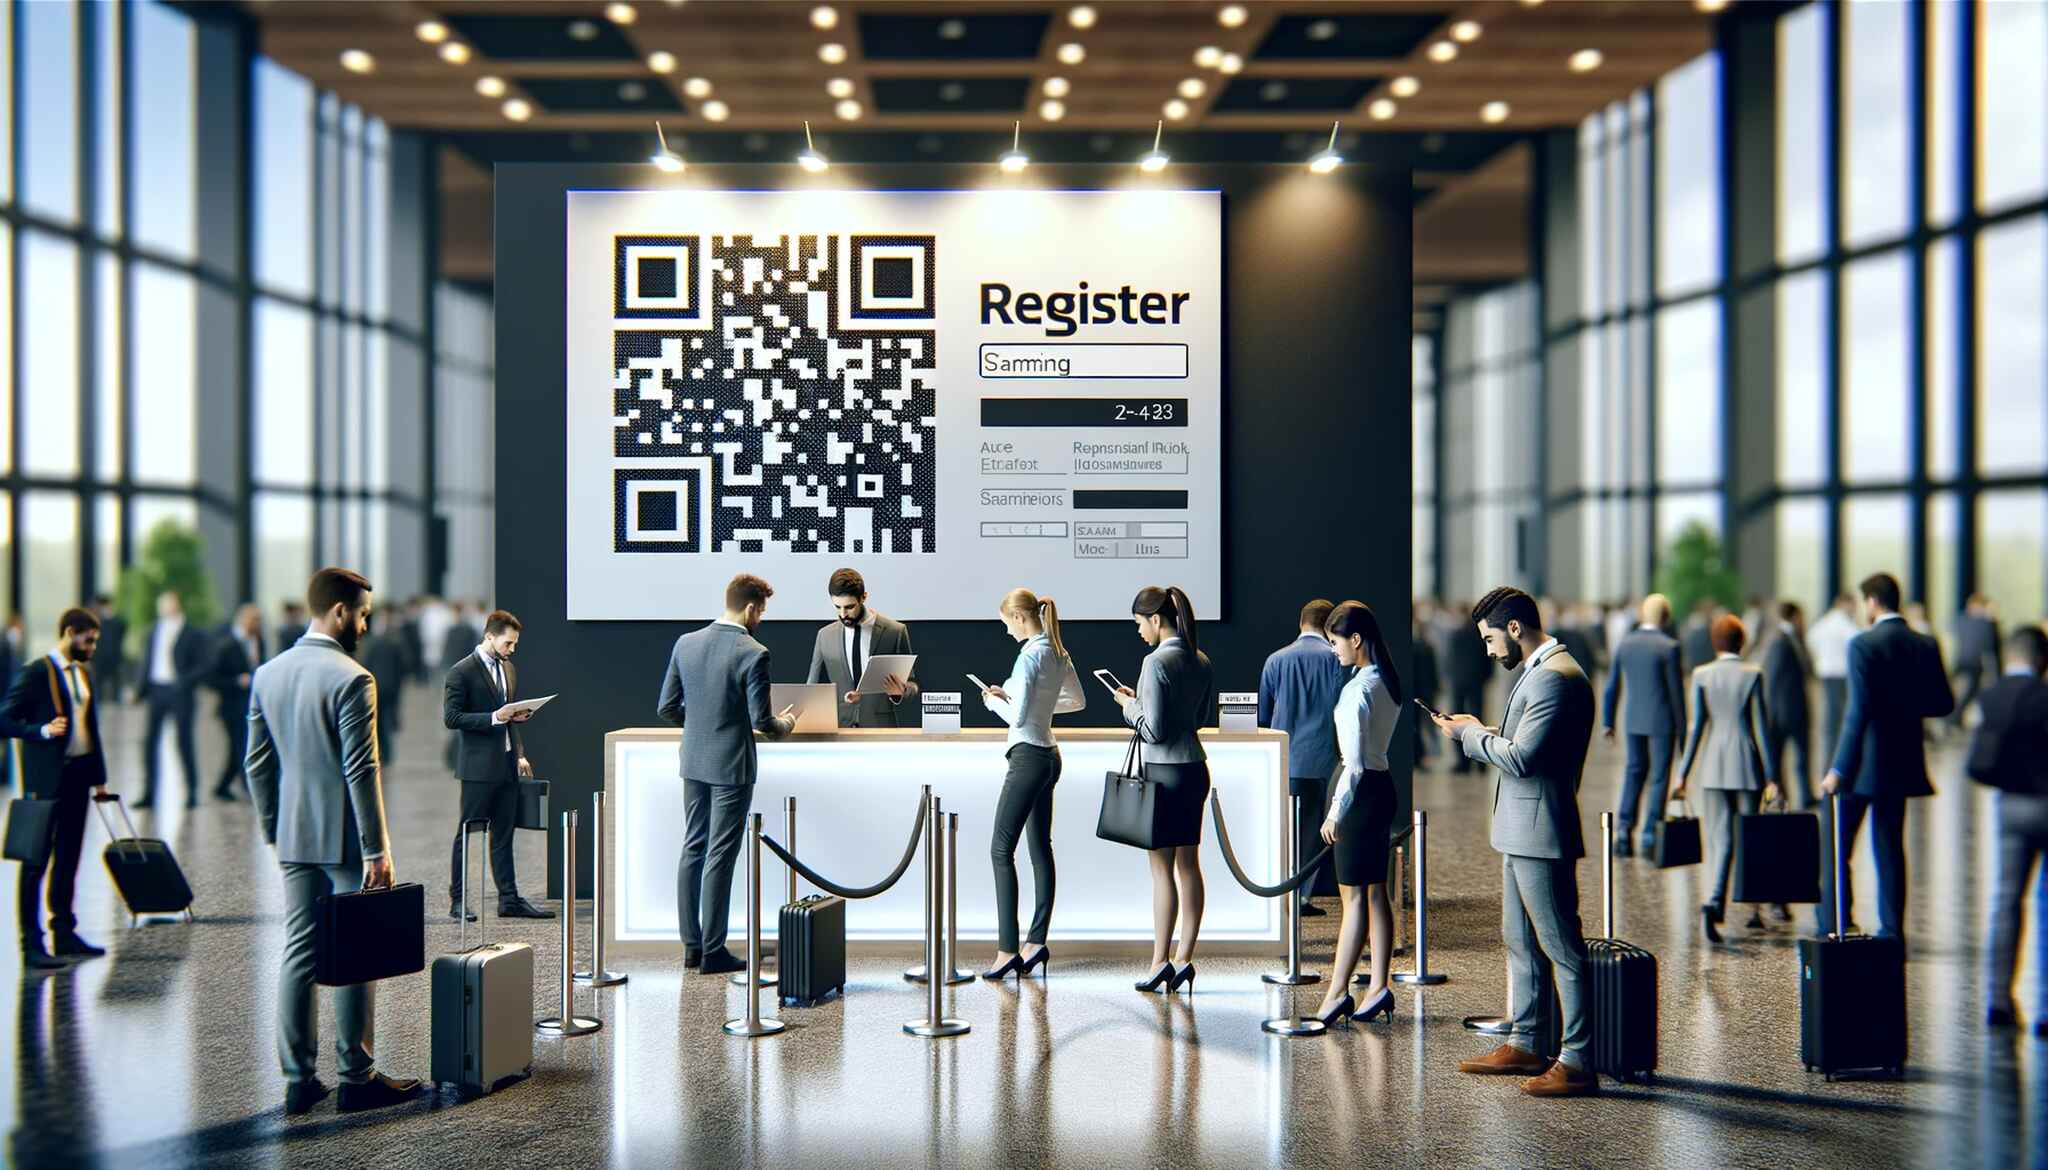 A modern conference registration desk with a large QR code and attendees